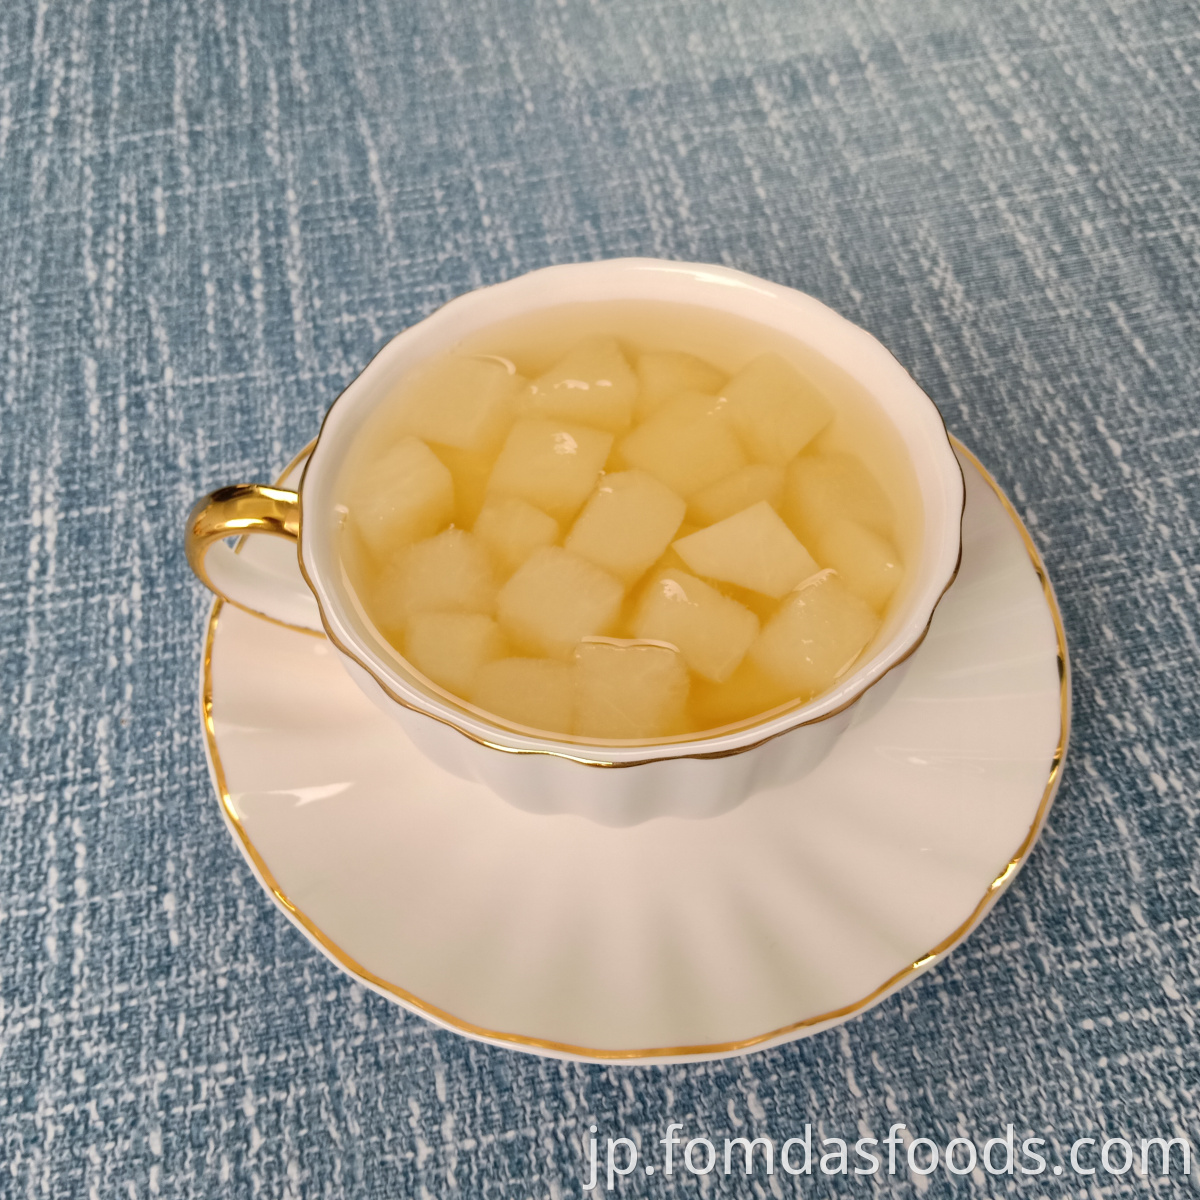 Canned Pear in Light Syrup